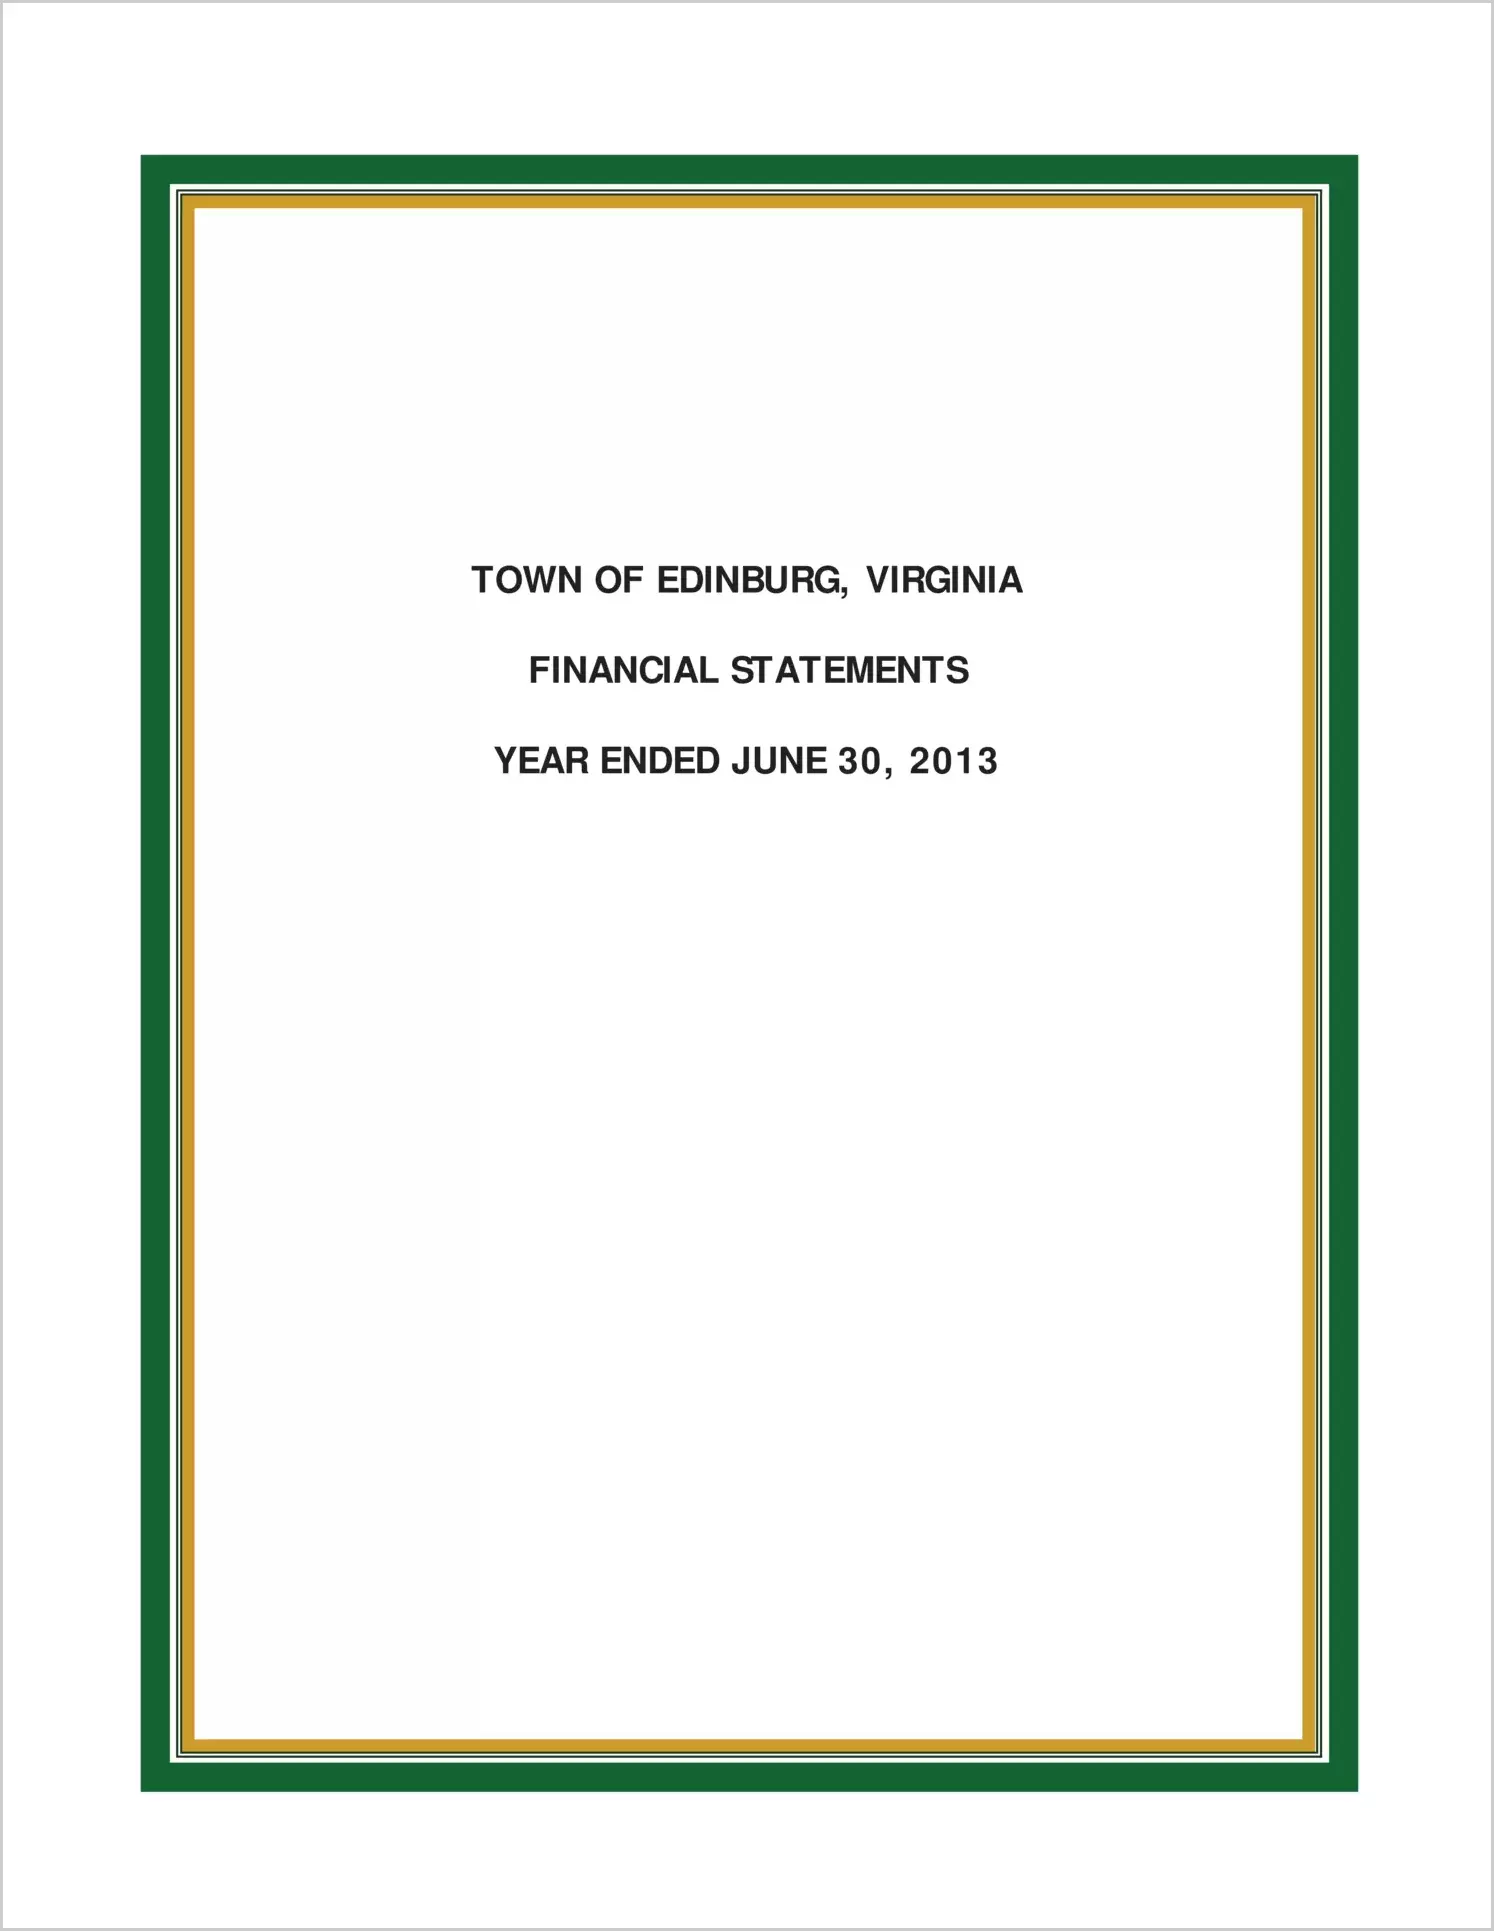 2013 Annual Financial Report for Town of Edinburg